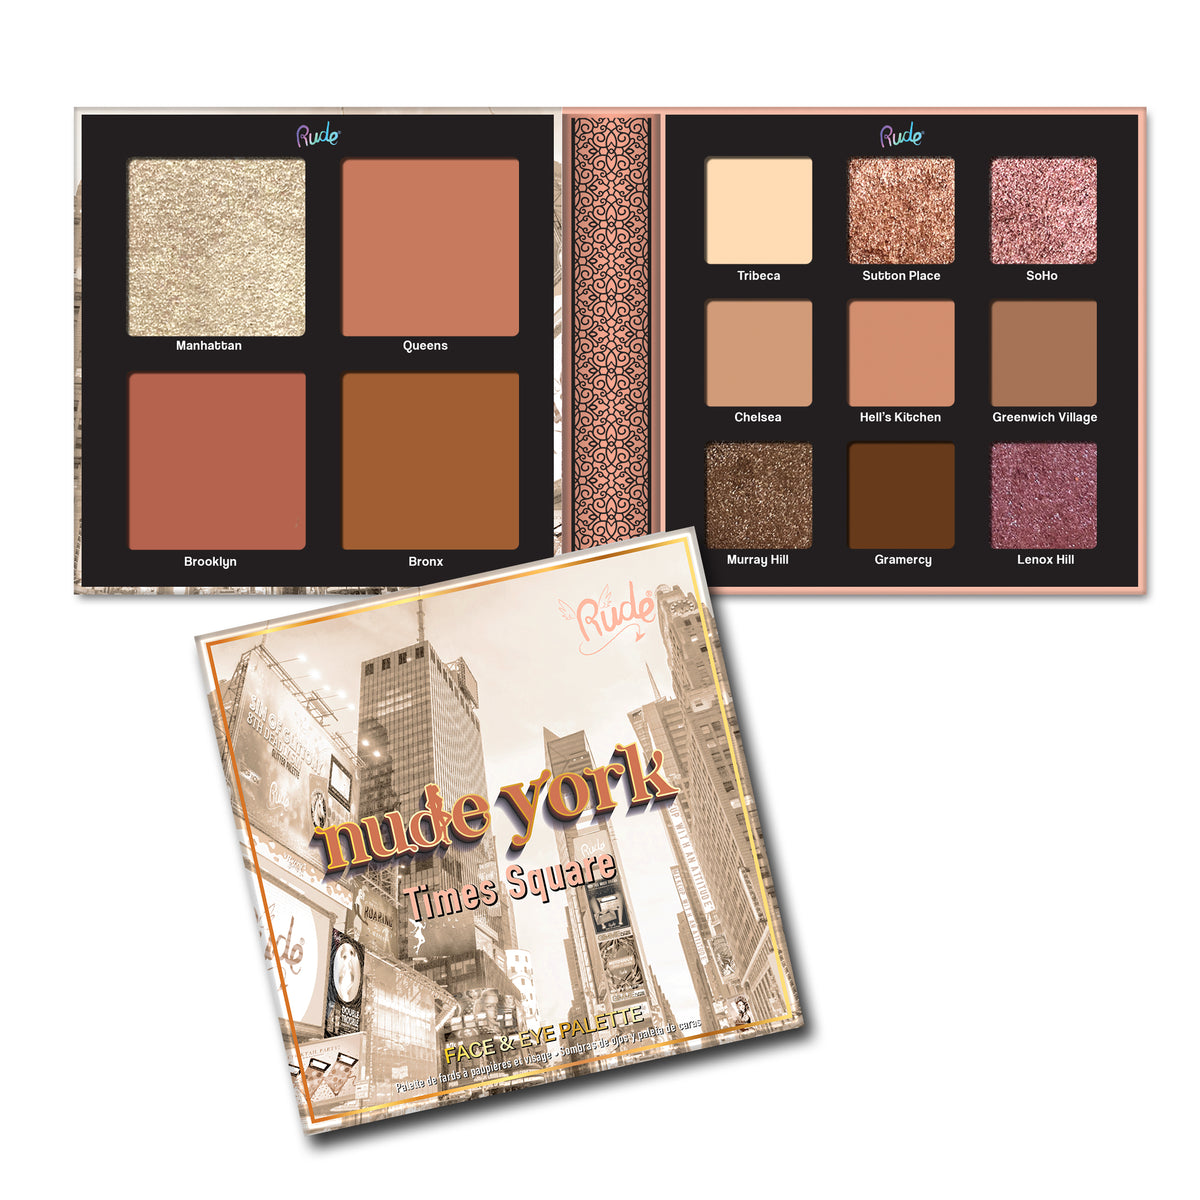 Nude York Face and Eye Palette